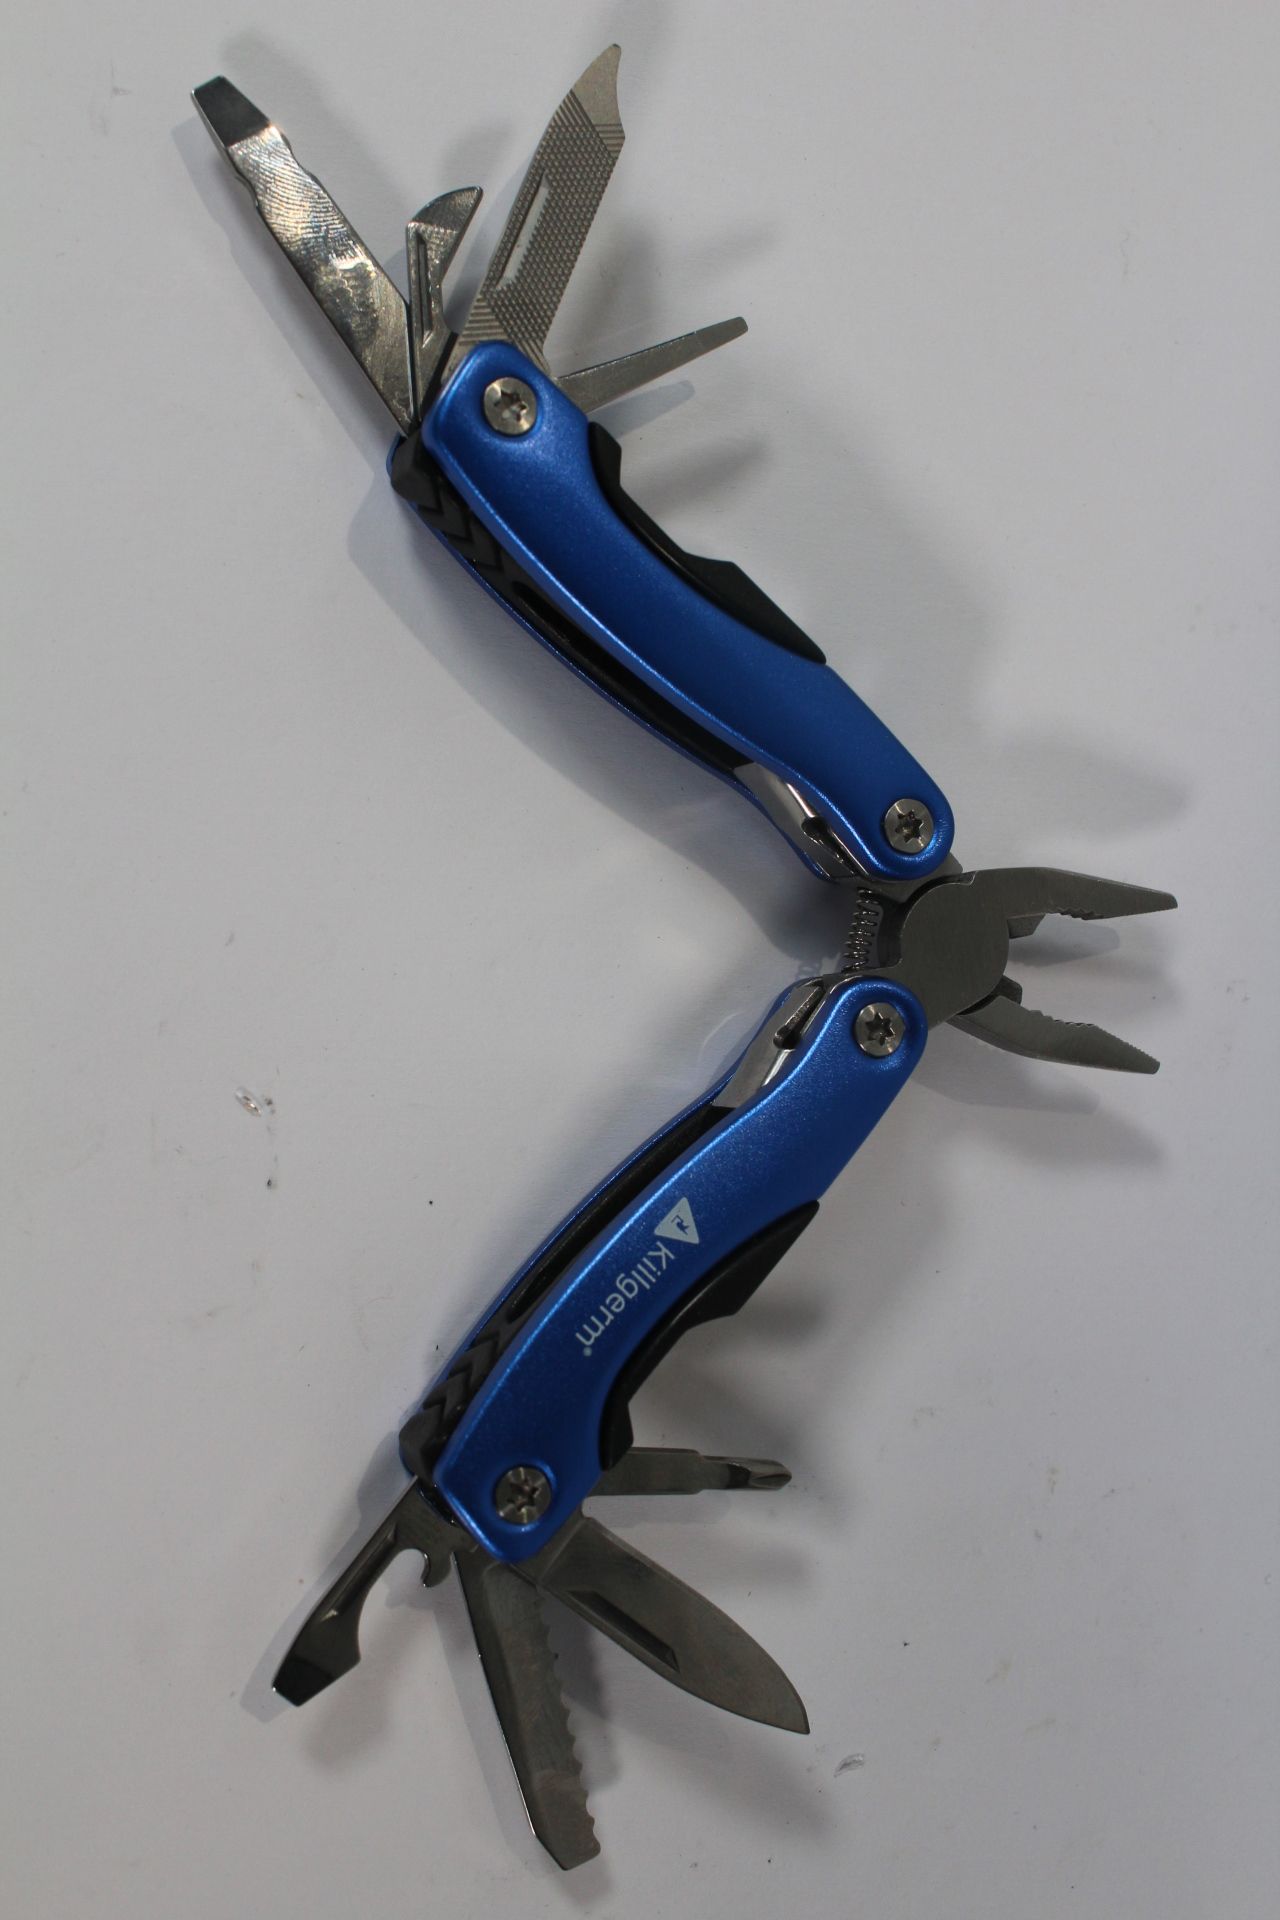 One Hundred Pocket Multi-Tools - As New (With a company logo).